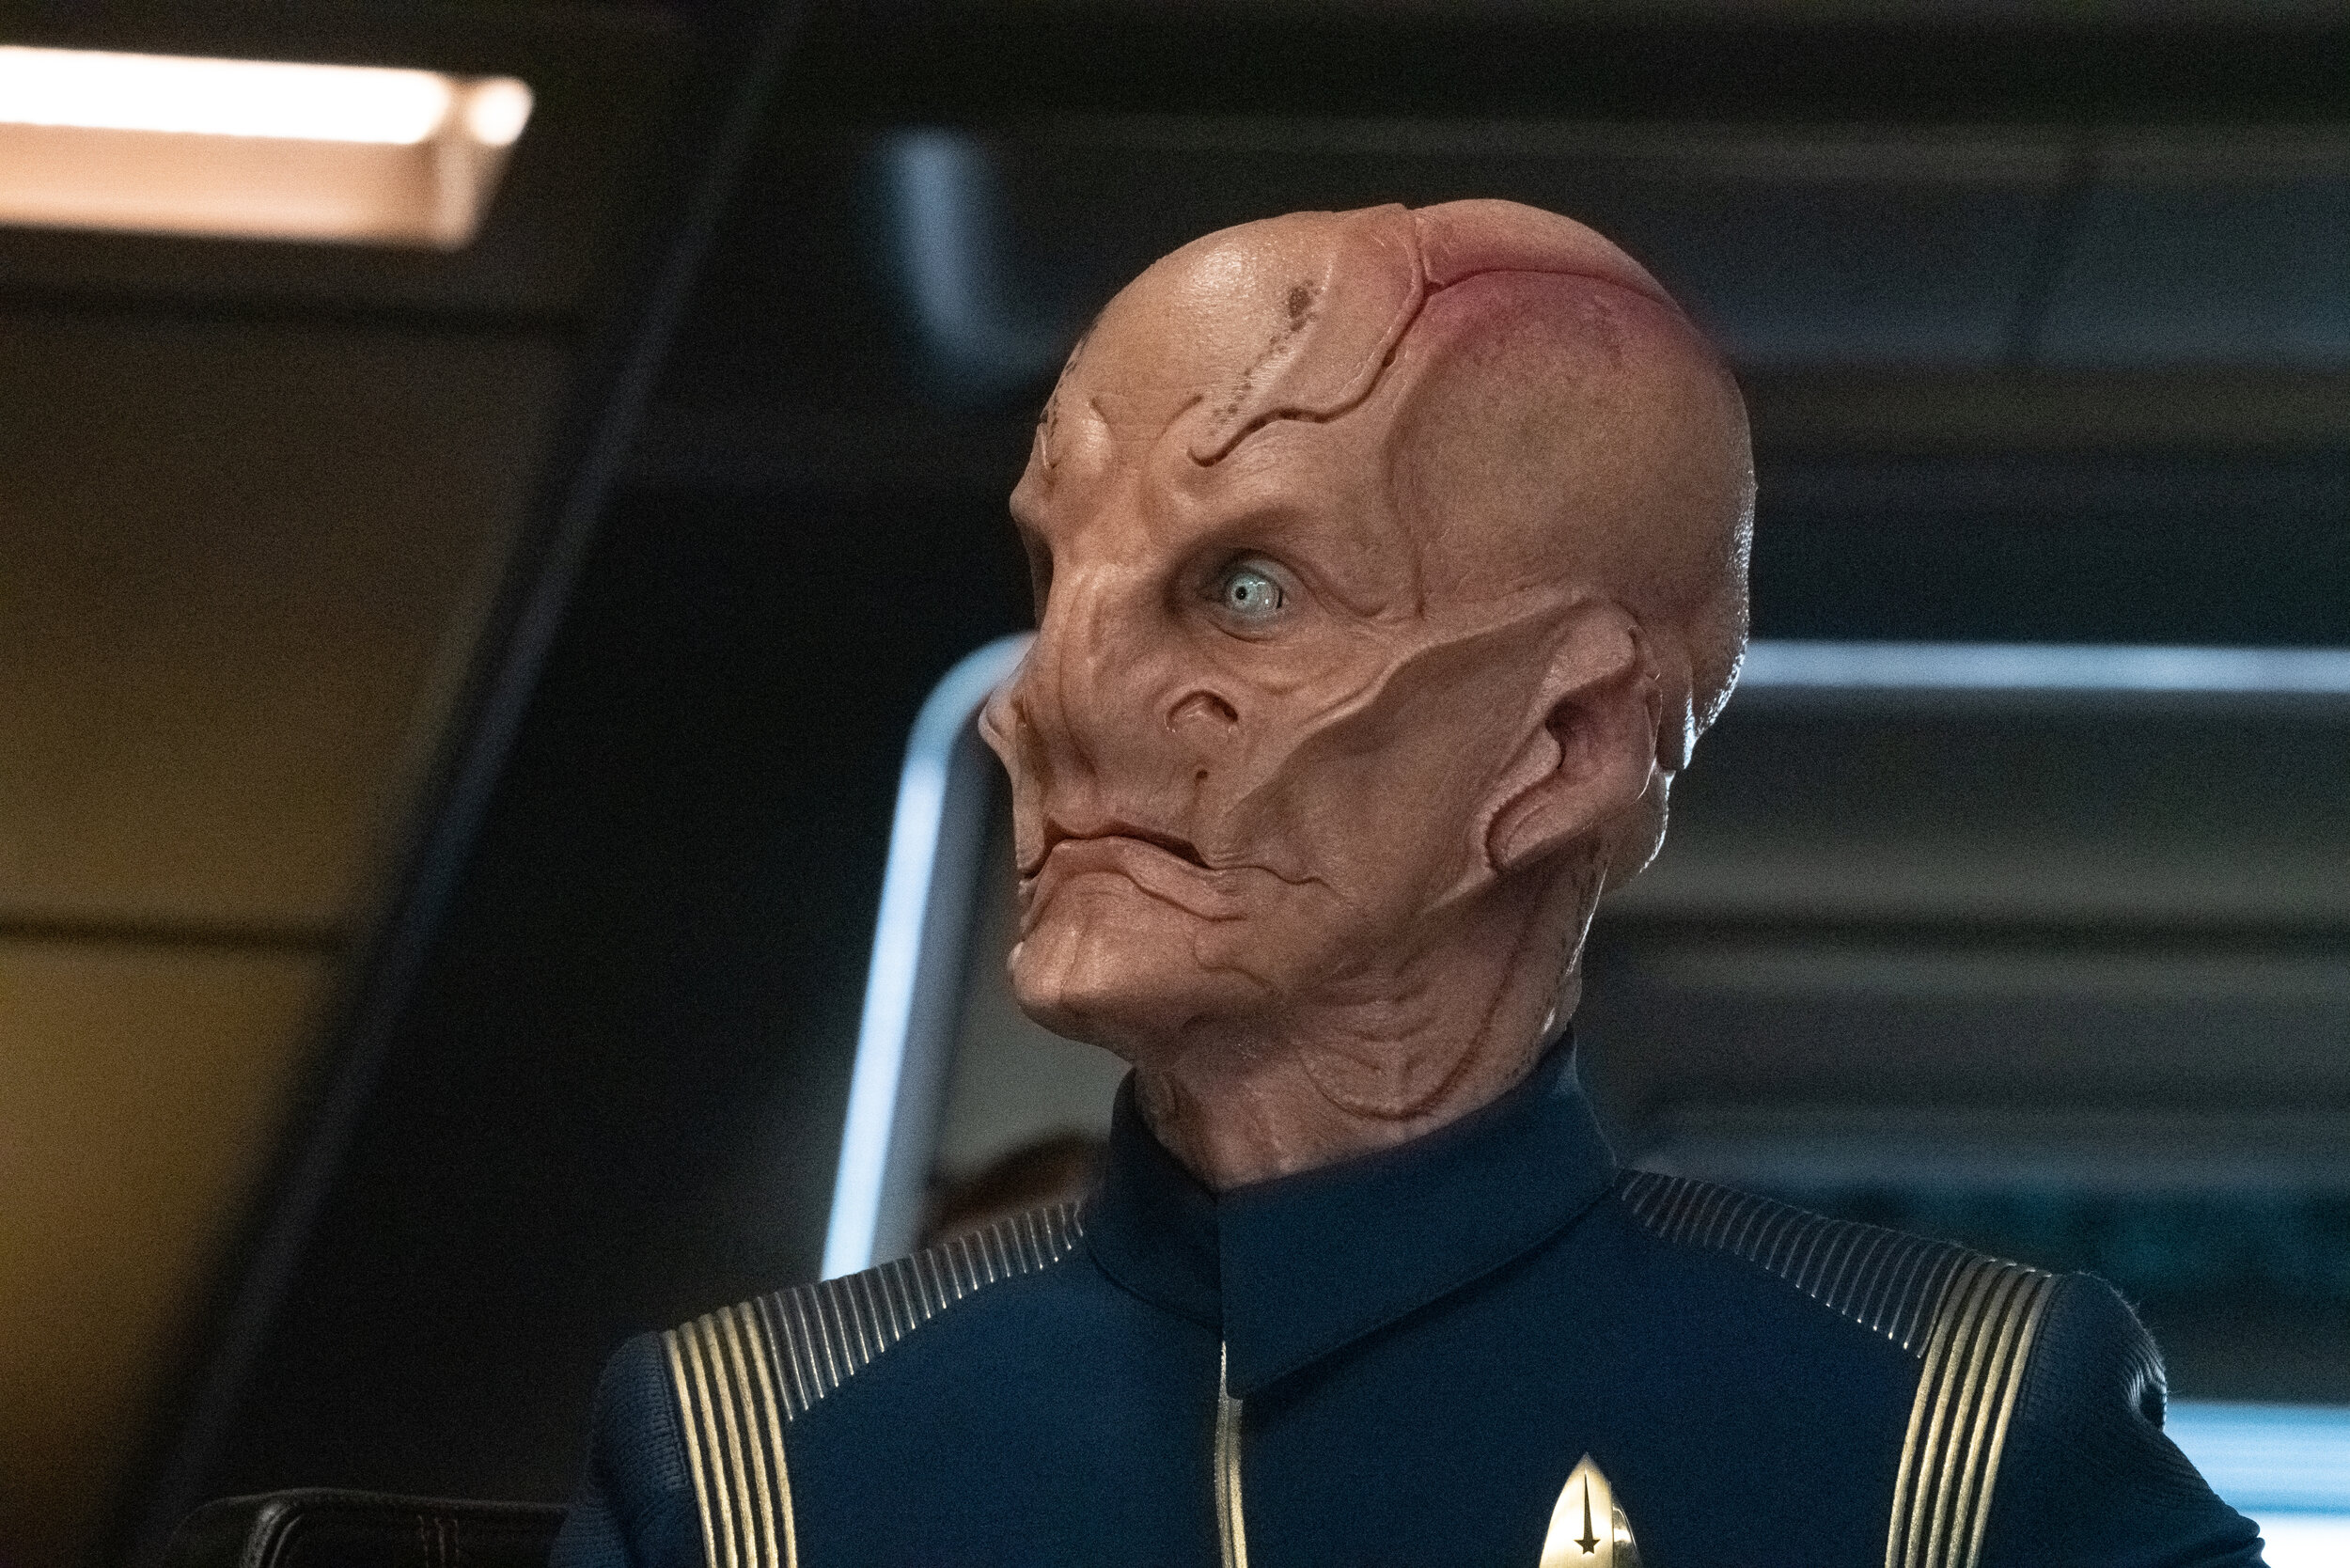   "Die Trying" -- Ep#305 -- Pictured: Doug Jones as Saru of the CBS All Access series STAR TREK: DISCOVERY. Photo Cr: Michael Gibson/CBS ©2020 CBS Interactive, Inc. All Rights Reserved.  